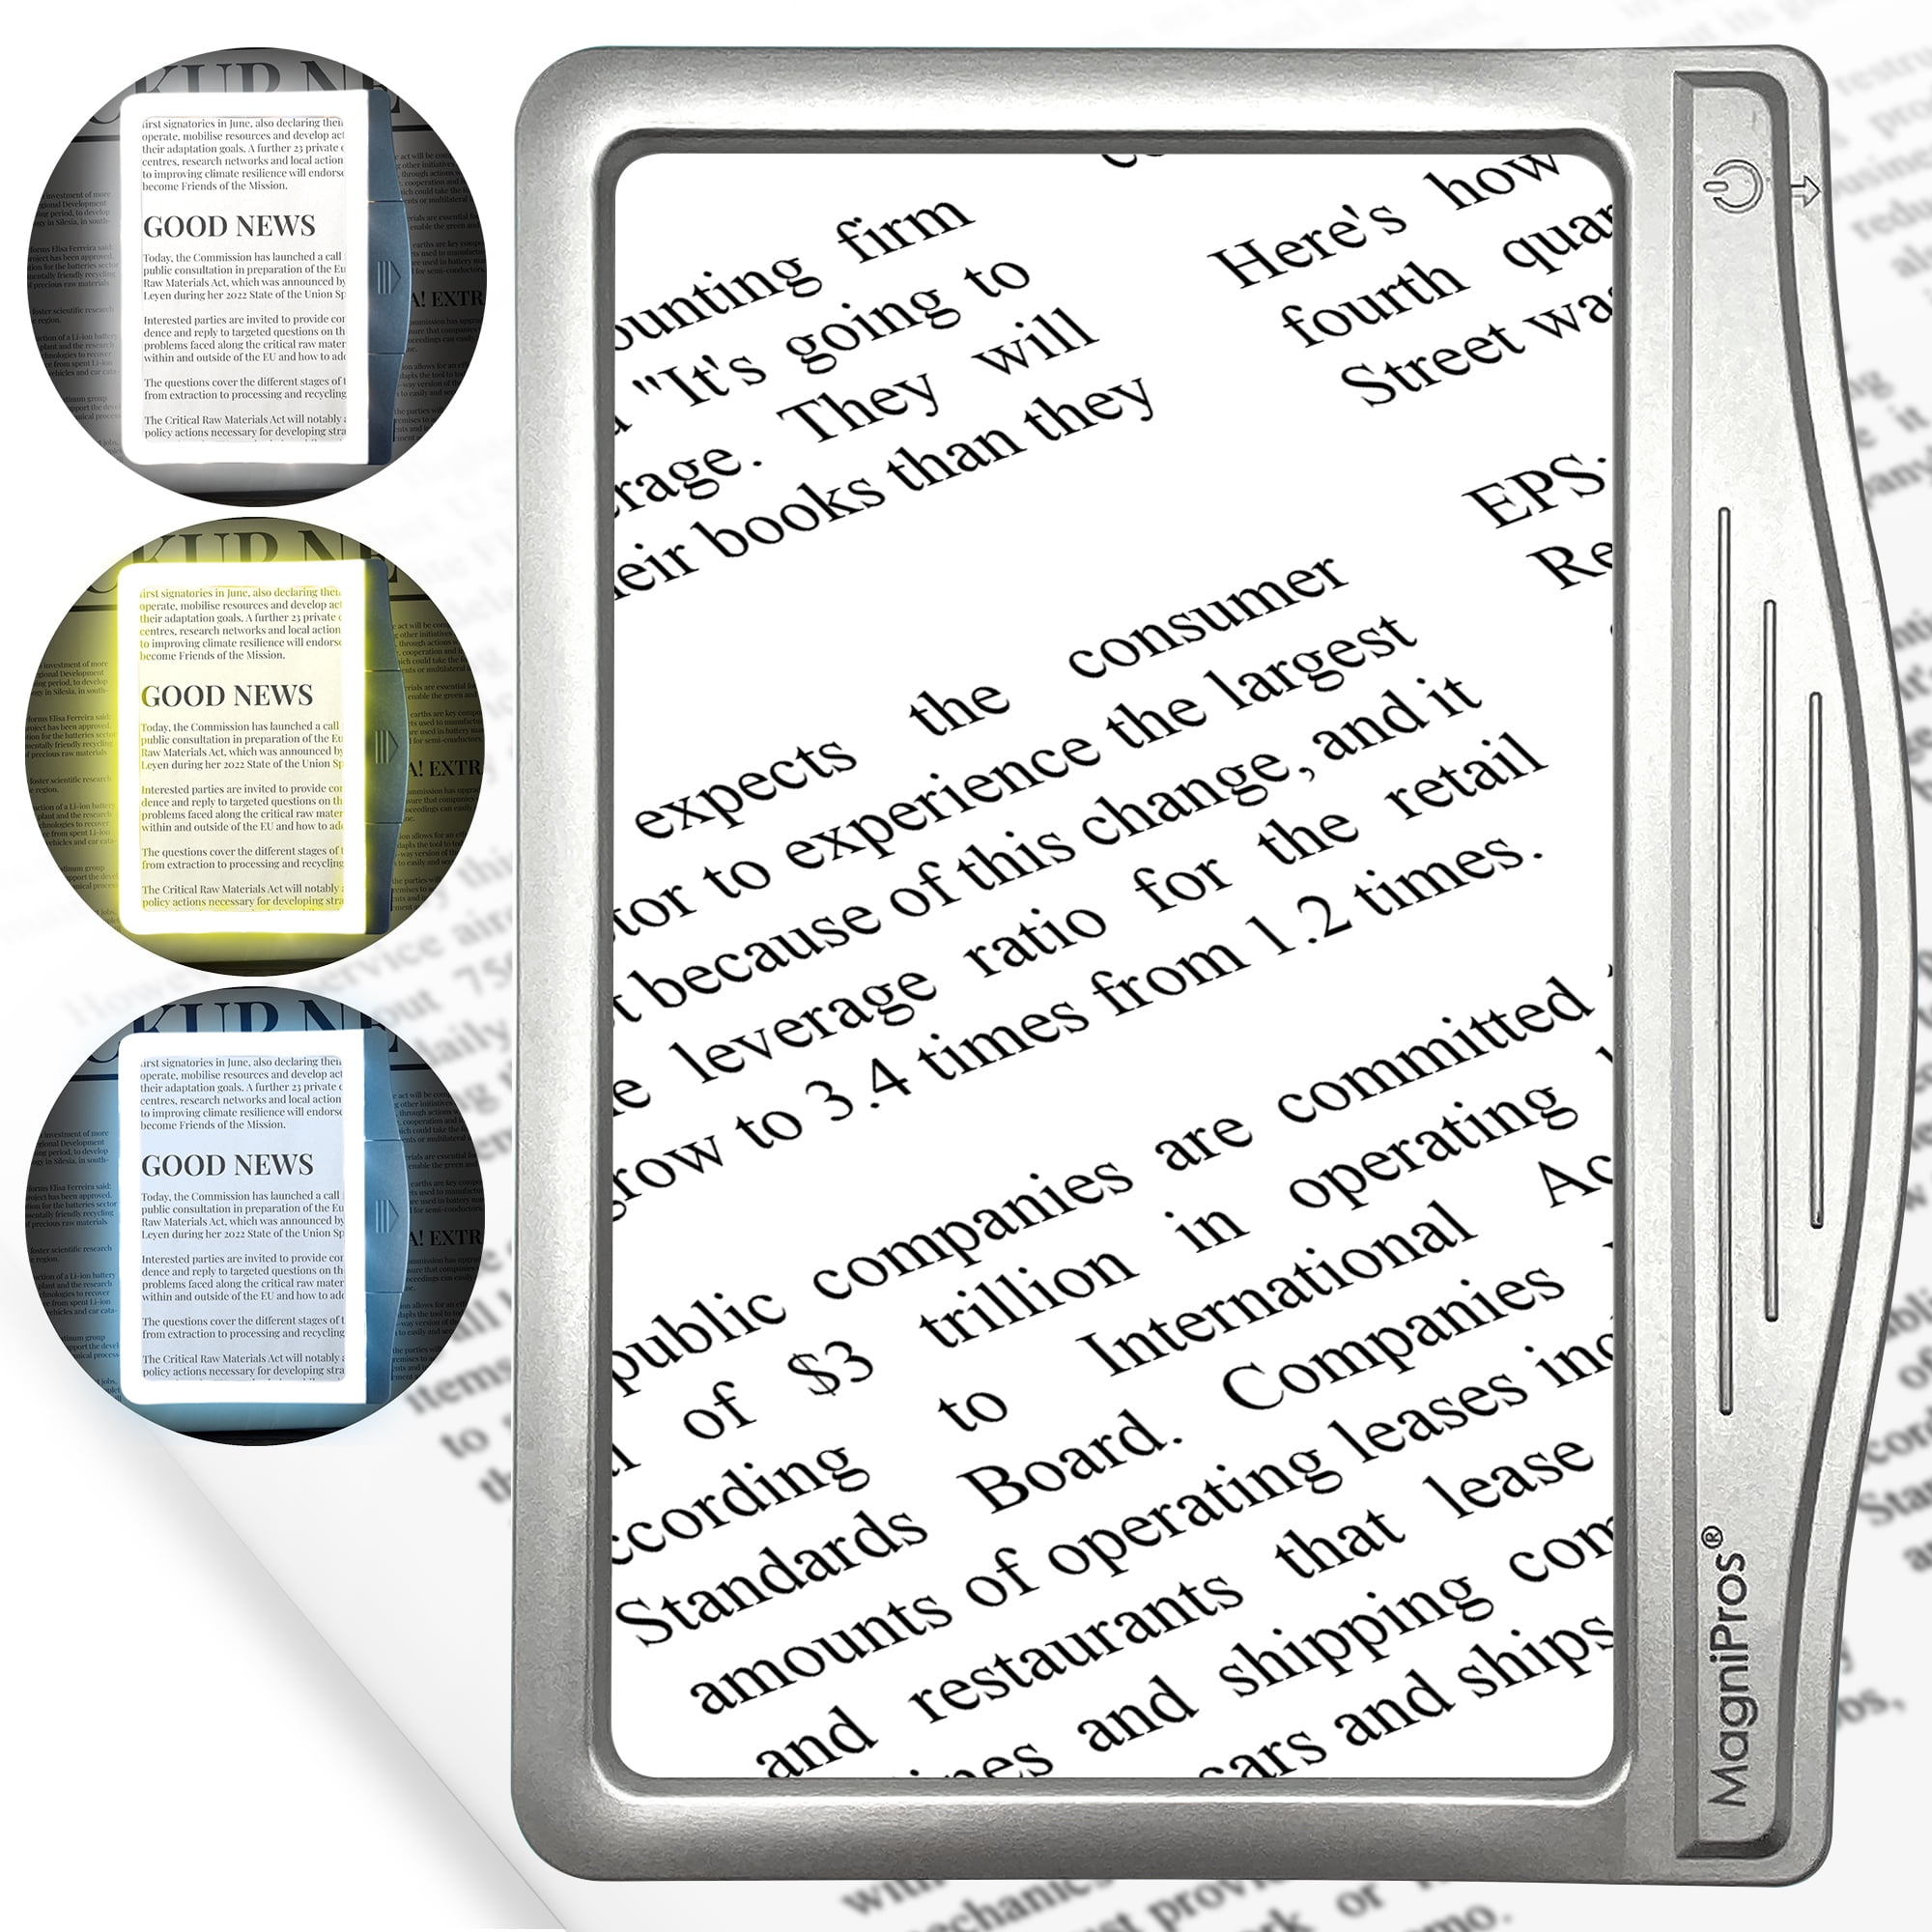  Eye Candy AS-SEEN-ON-TV Full Page Book Magnifier and